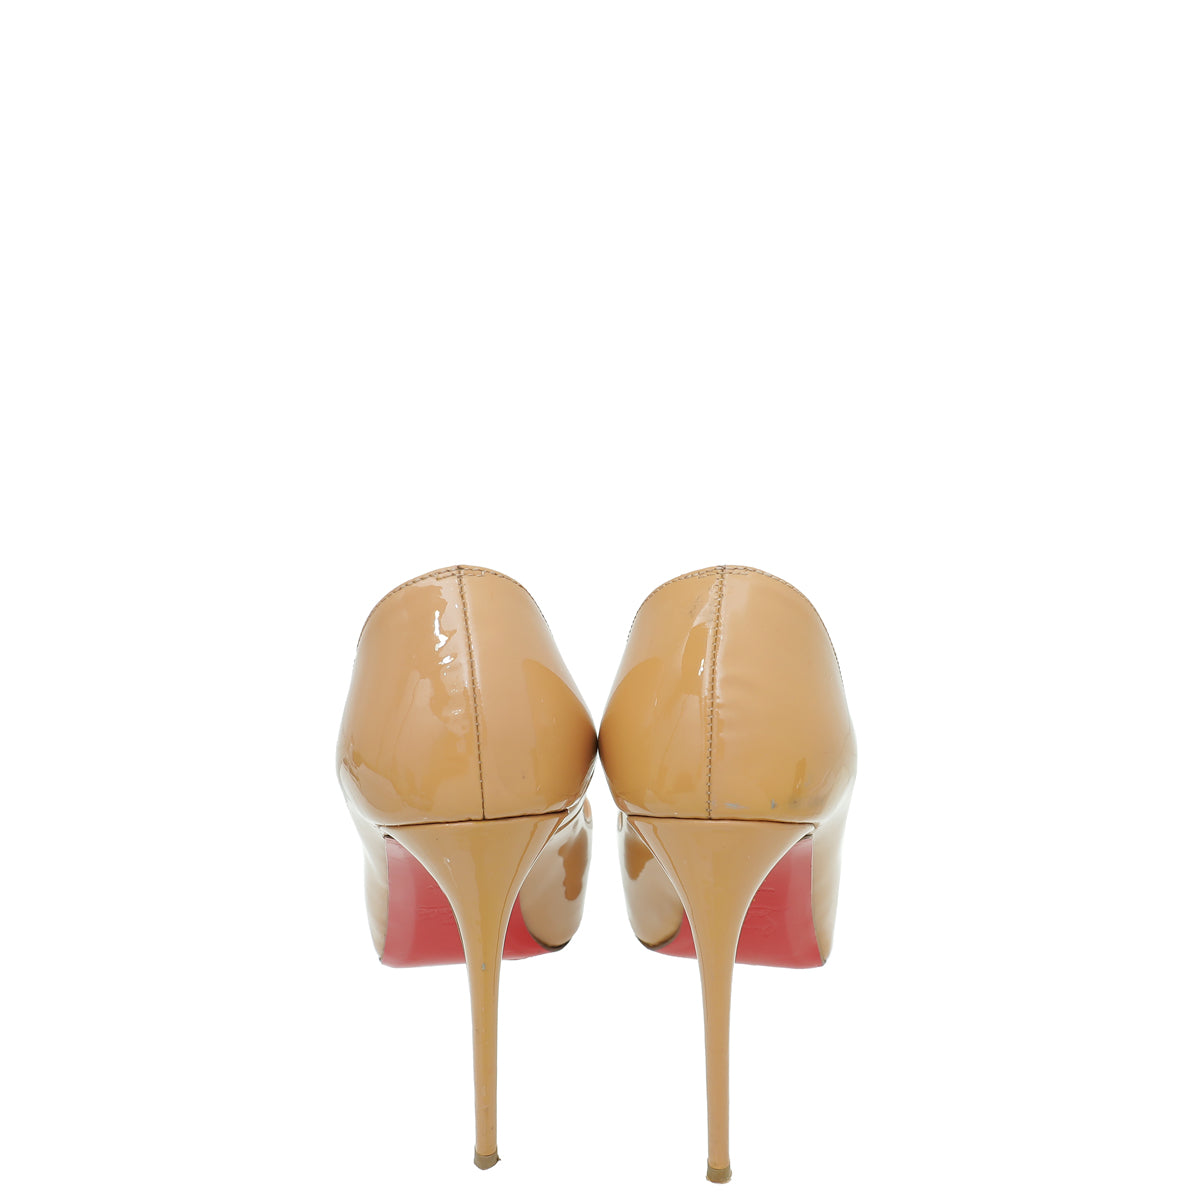 Christian Louboutin Nude New Very Prive 120 Pumps 36